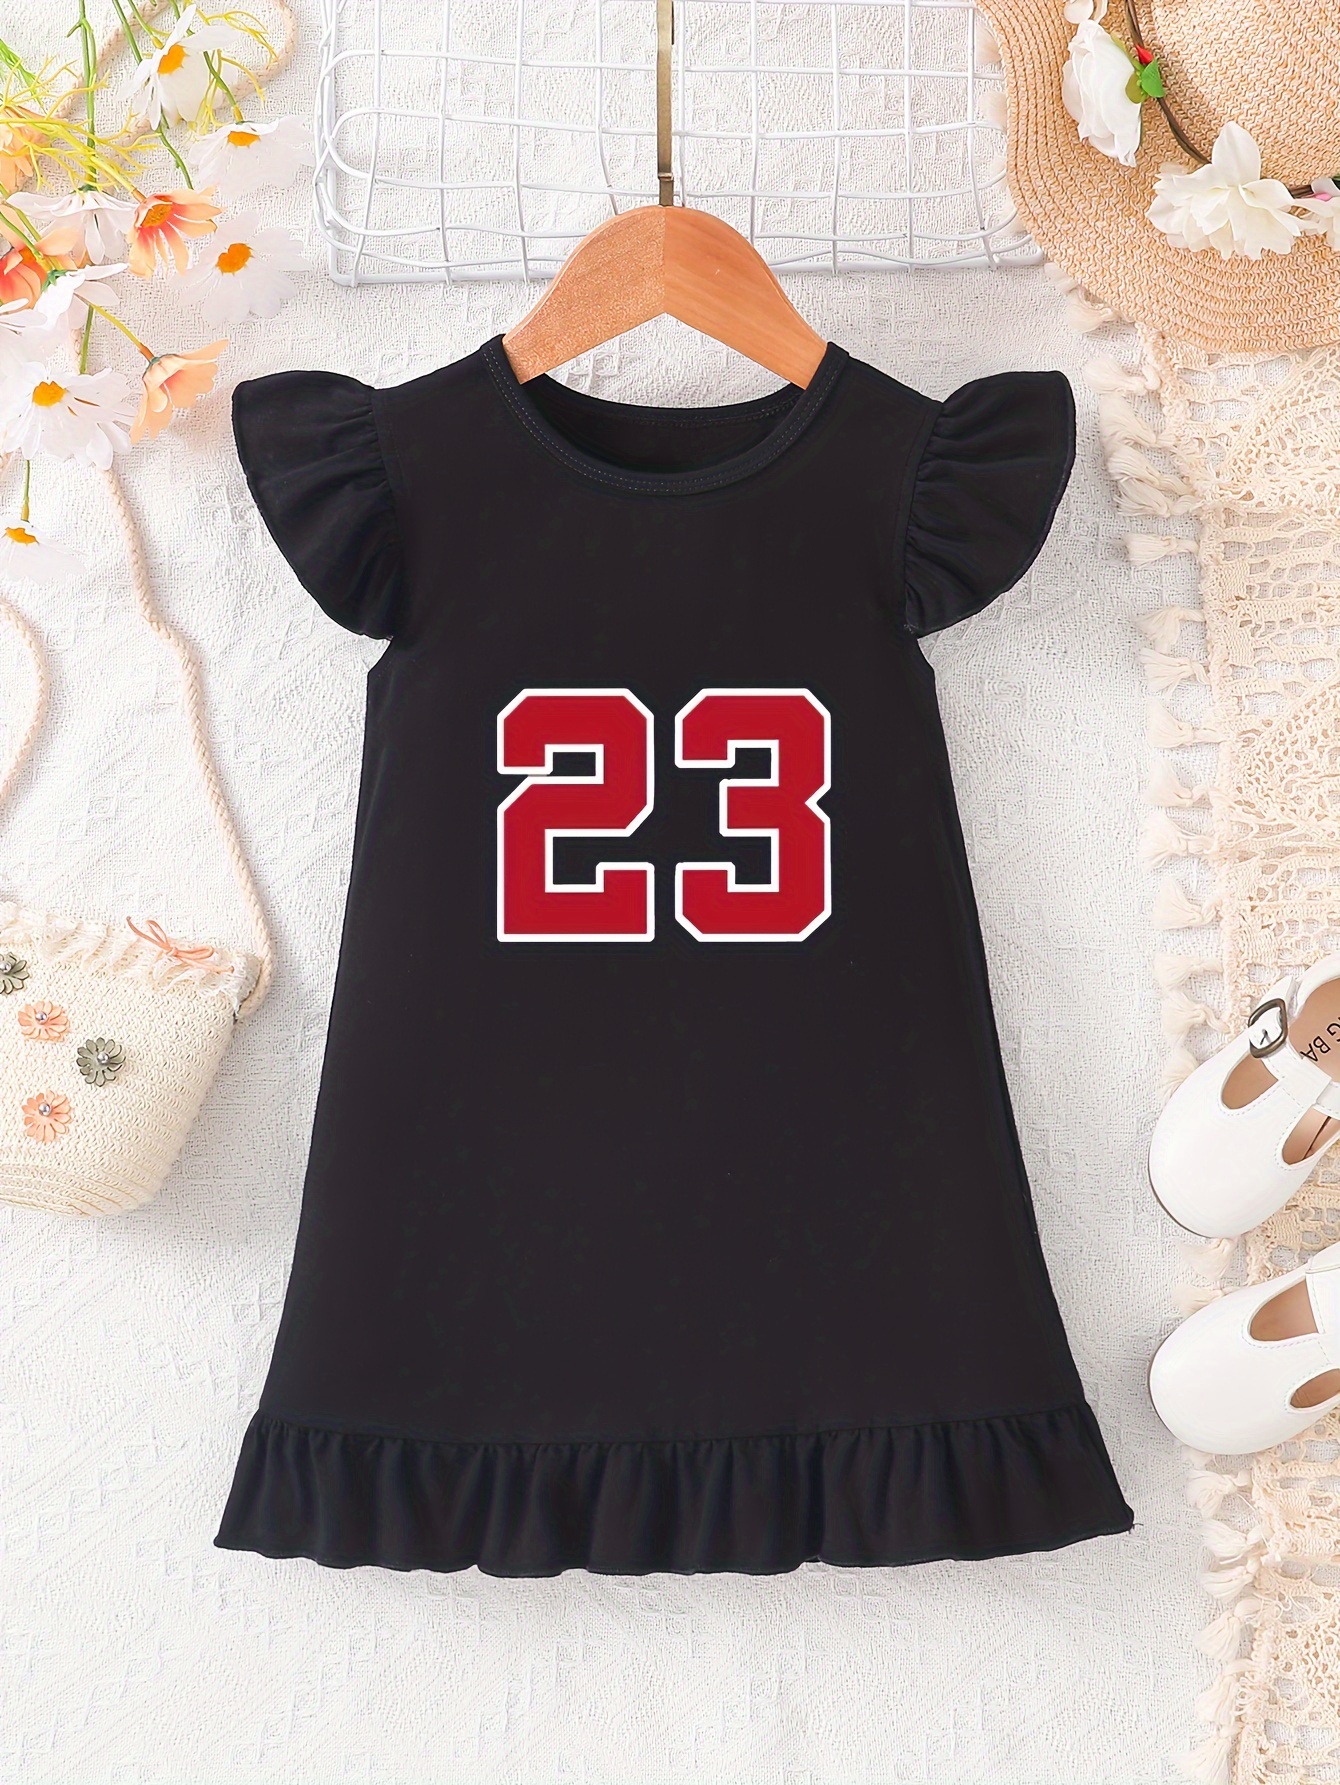 23 Cute teenager clothes ideas  clothes, outfits for teens